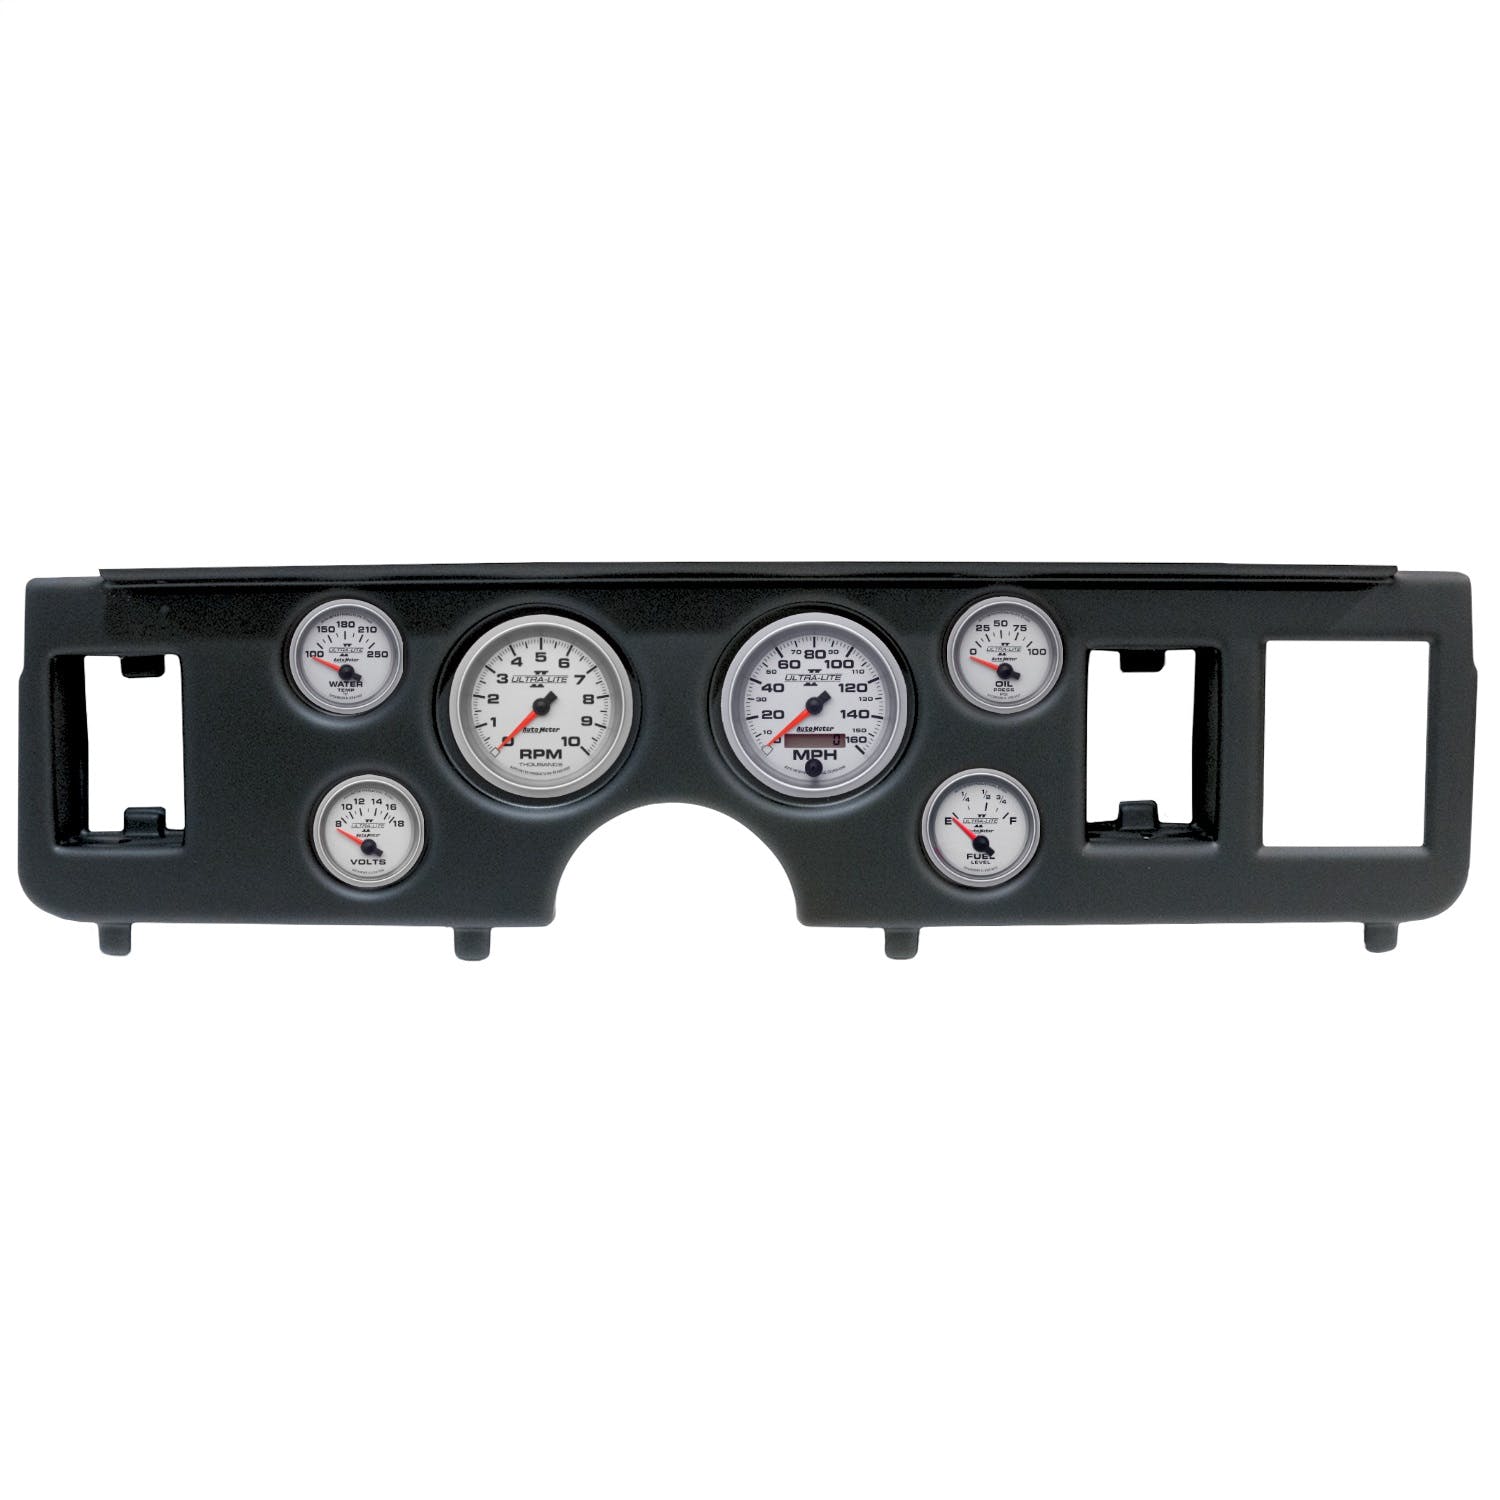 AutoMeter Products 2917-14 6 Gauge Direct-Fit Dash Kit, Ford Mustang 79-86, Ultra-Lite II